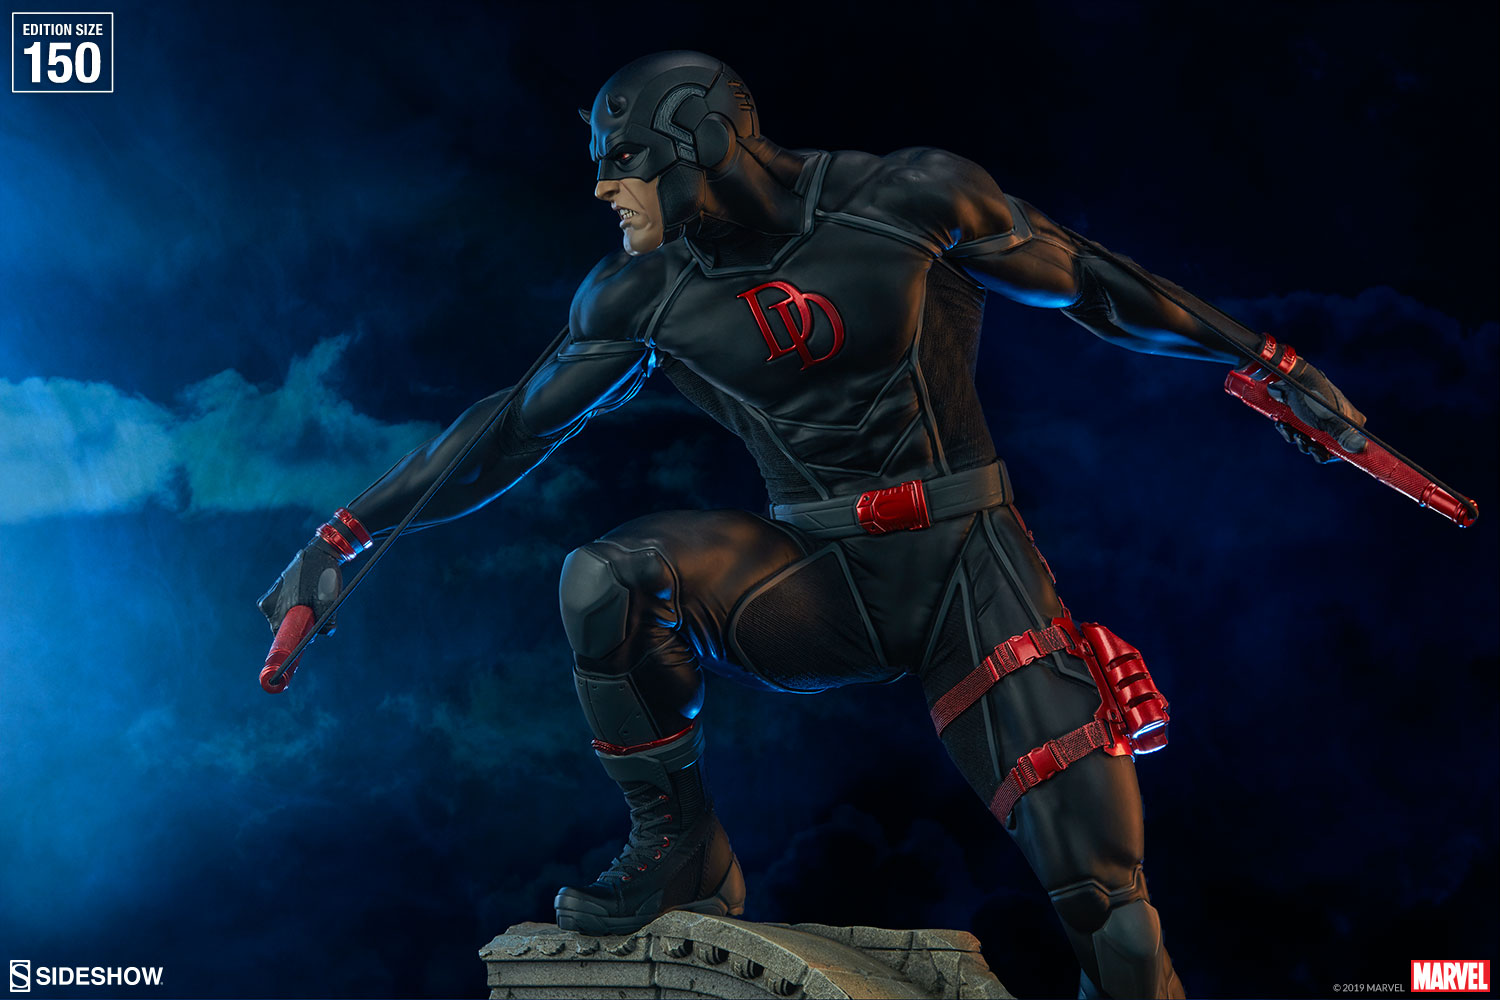 https://www.sideshow.com/storage/product-images/3005392/daredevil-shadowlands_marvel_gallery_5ce6d3fed8a29.jpg